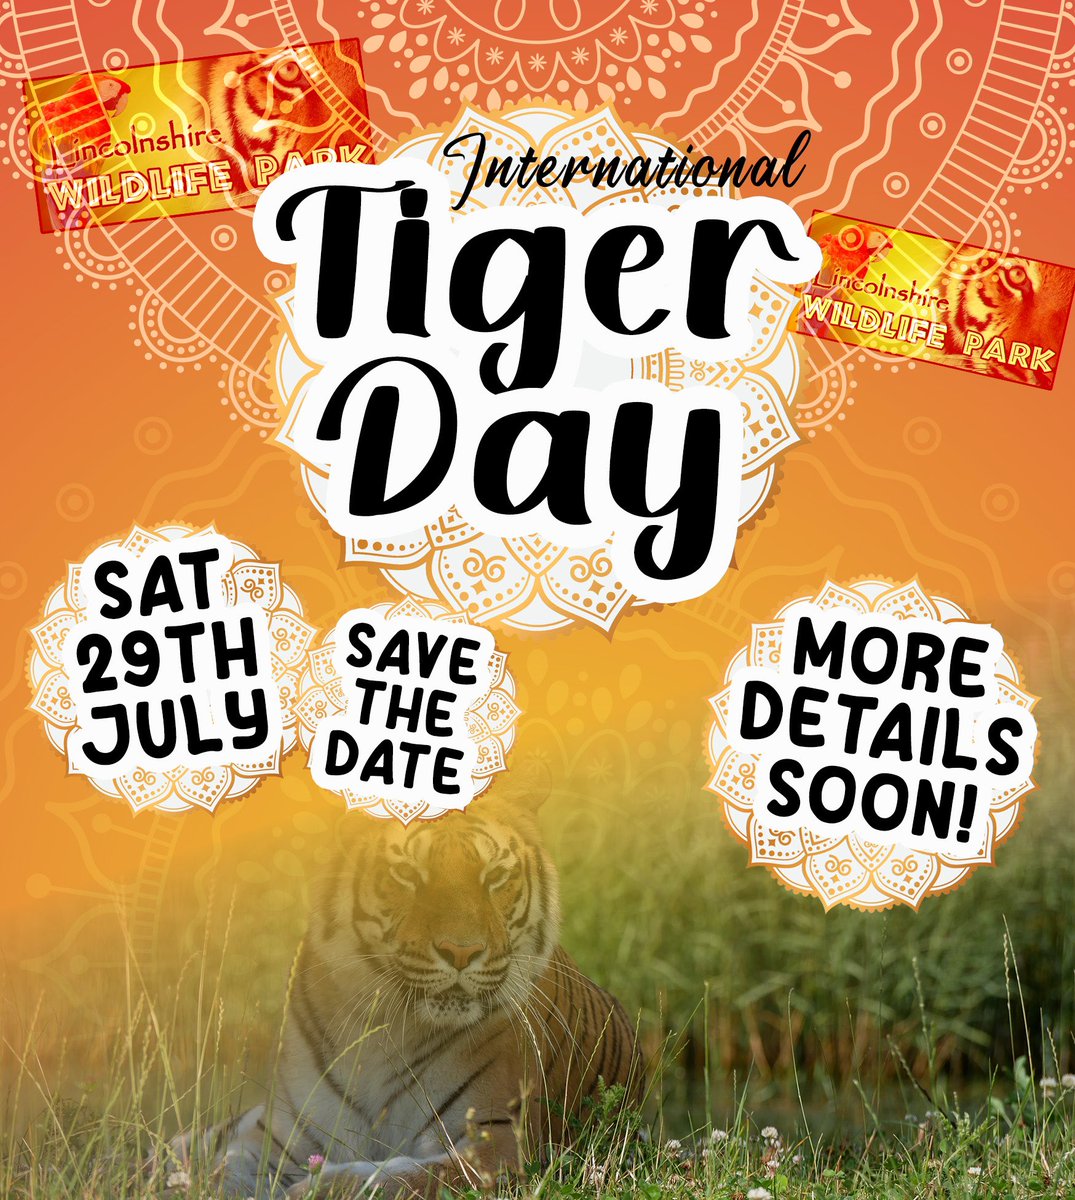 Our annual big #family event #InternationalTigerDay is coming soon… save the date! 🐯 Saturday 29th July! 🐯 #Lincolnshire #Skegness #events #visitlincolnshire #tigers #july #india #awareness #bigcats